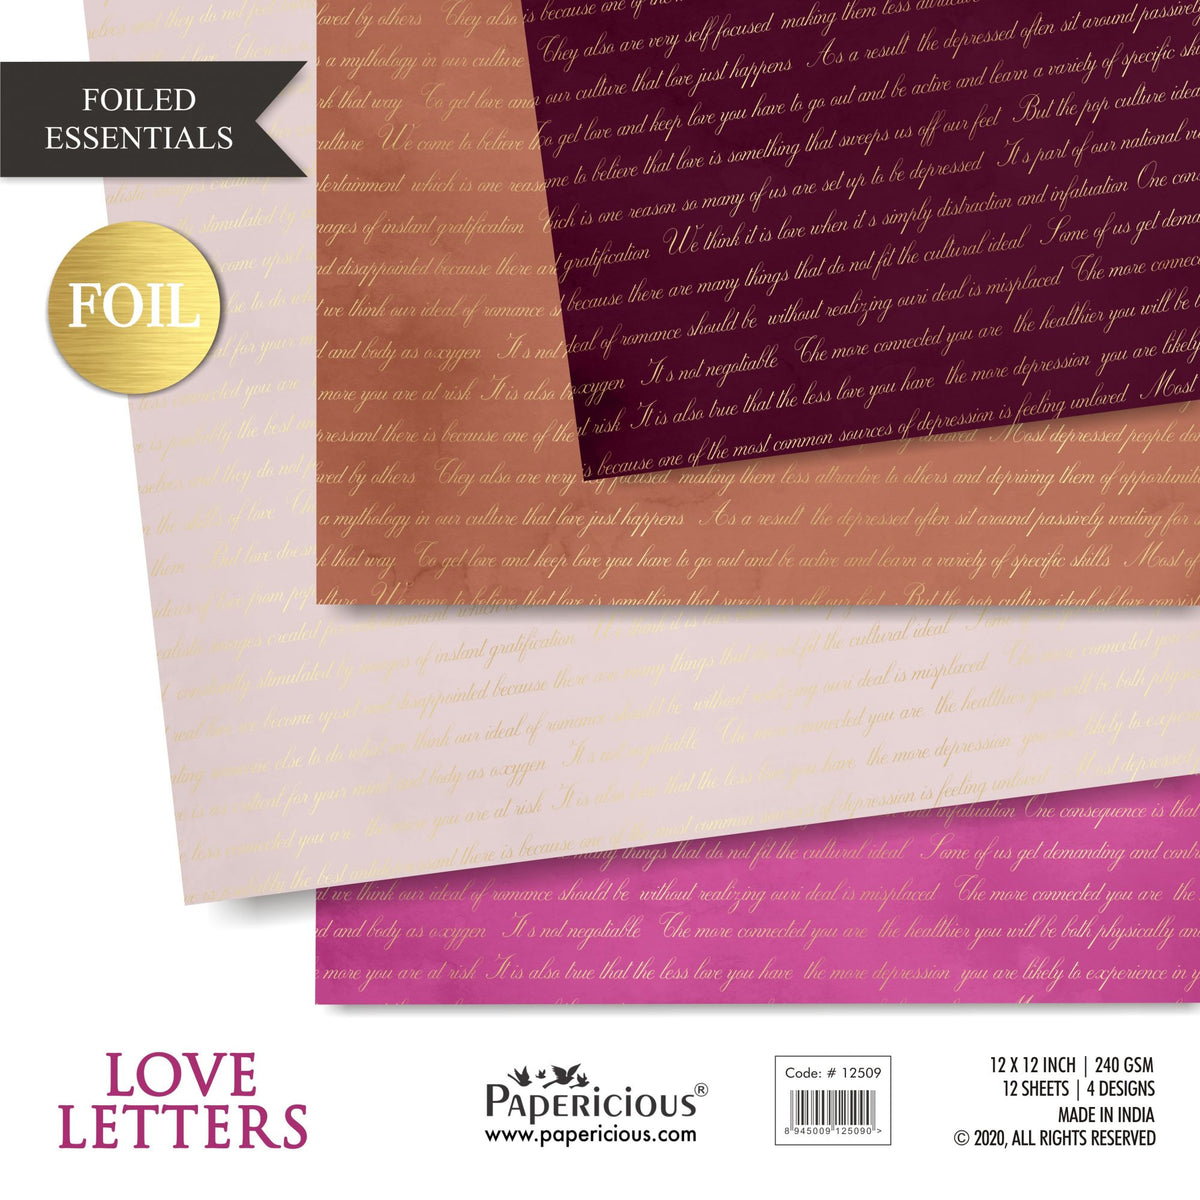 Papericious - Love Letters - Golden Foiled Pattern Scrapbook Papers 12x12 inch / 12 sheets